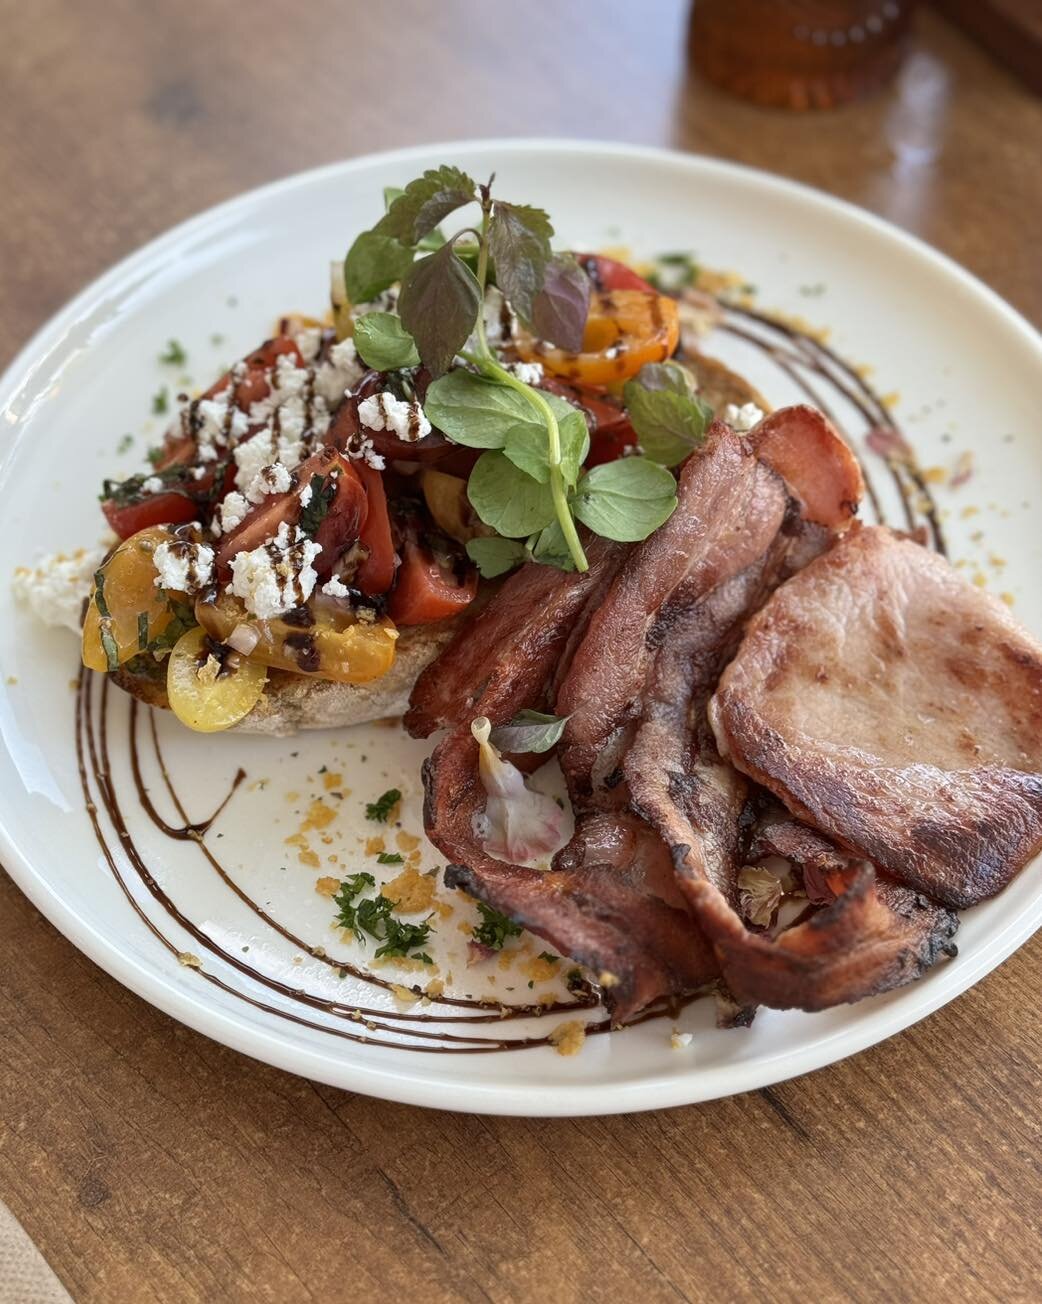 Yum! 🍅🌿🥓 Brekky Bruschetta  topped with goat cheese and a side of crispy bacon 👌
.
.
.
#brekky #brisbanefood #brisbaneeats #brisbanecafe #foodie